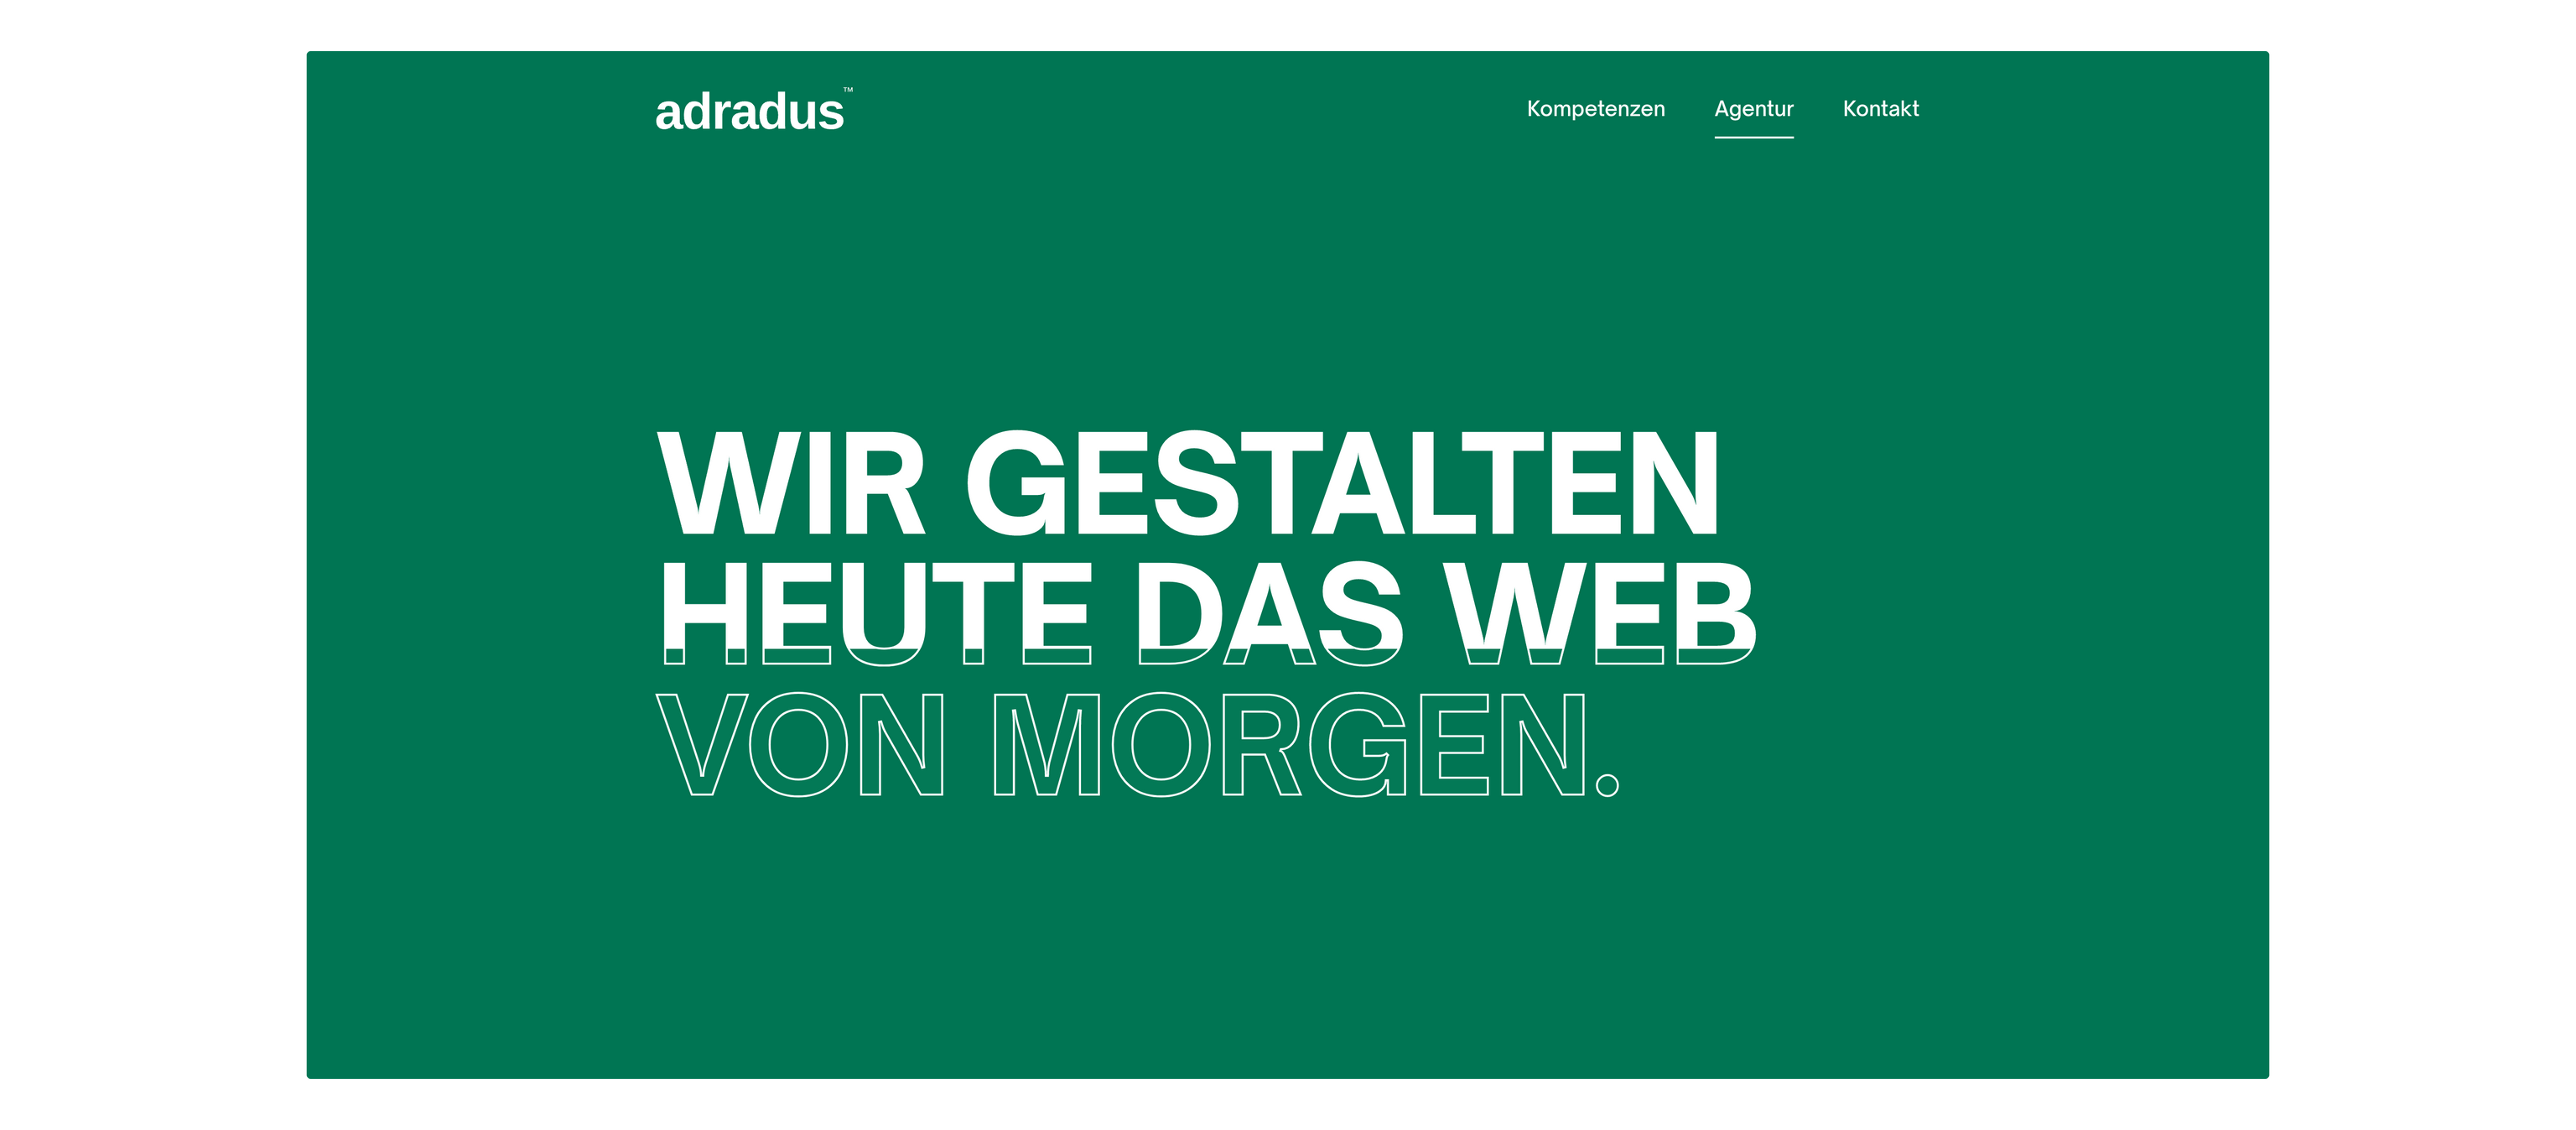 Page: Agentur (Agency)